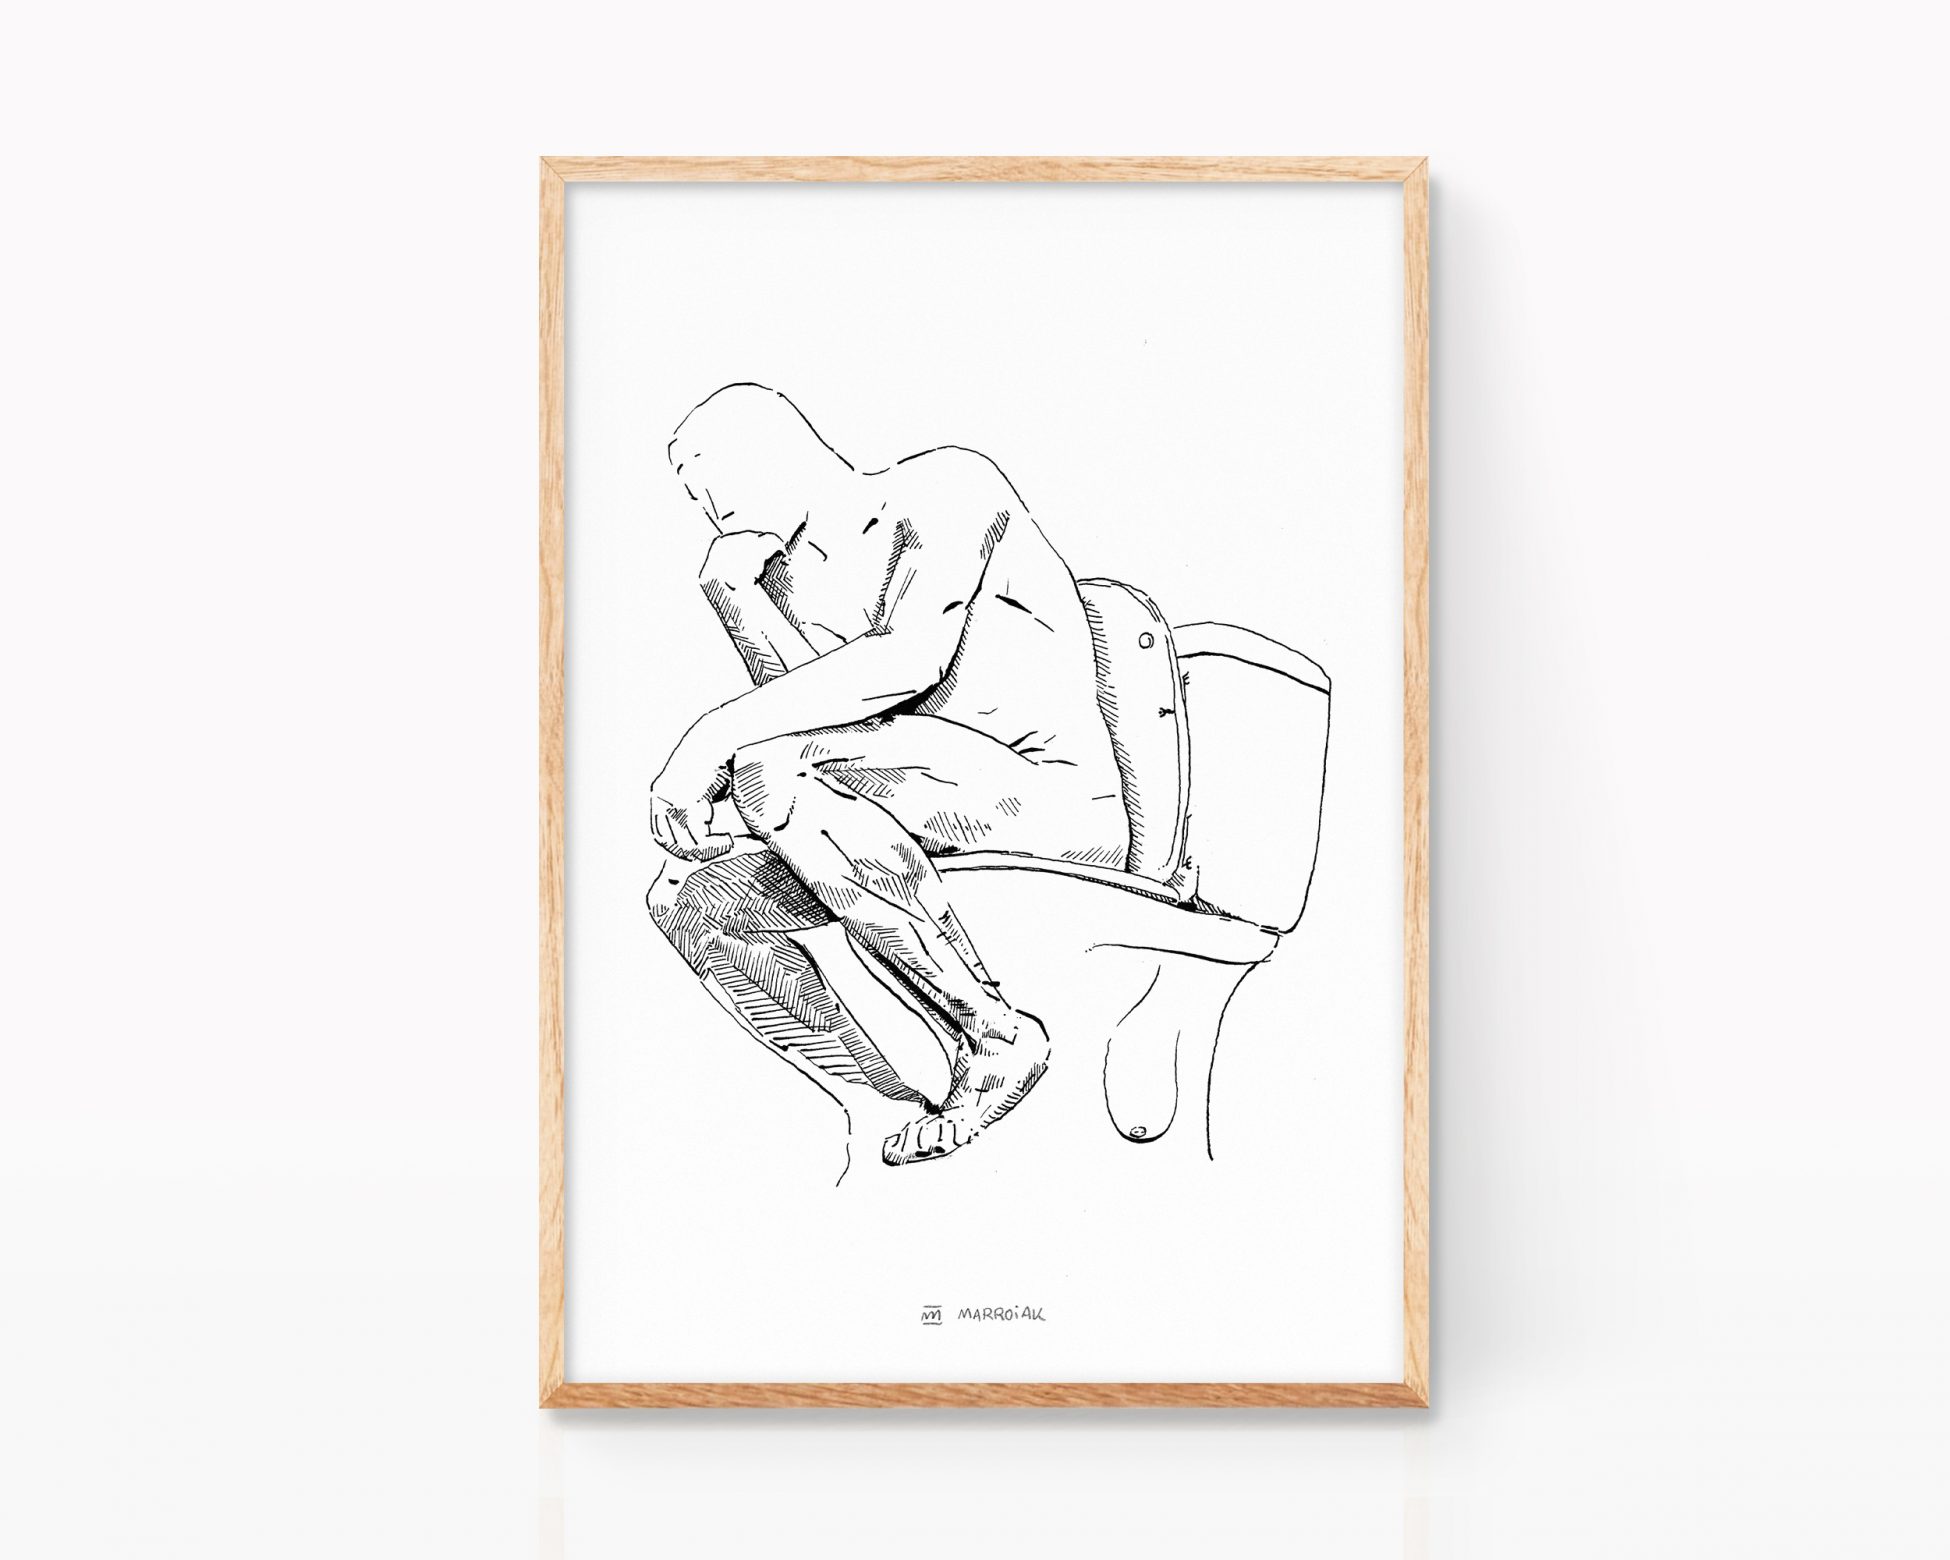 Bathroom wall decor. Black and white illustration print of the thinker by Auguste Rodin. Art remixes posters.